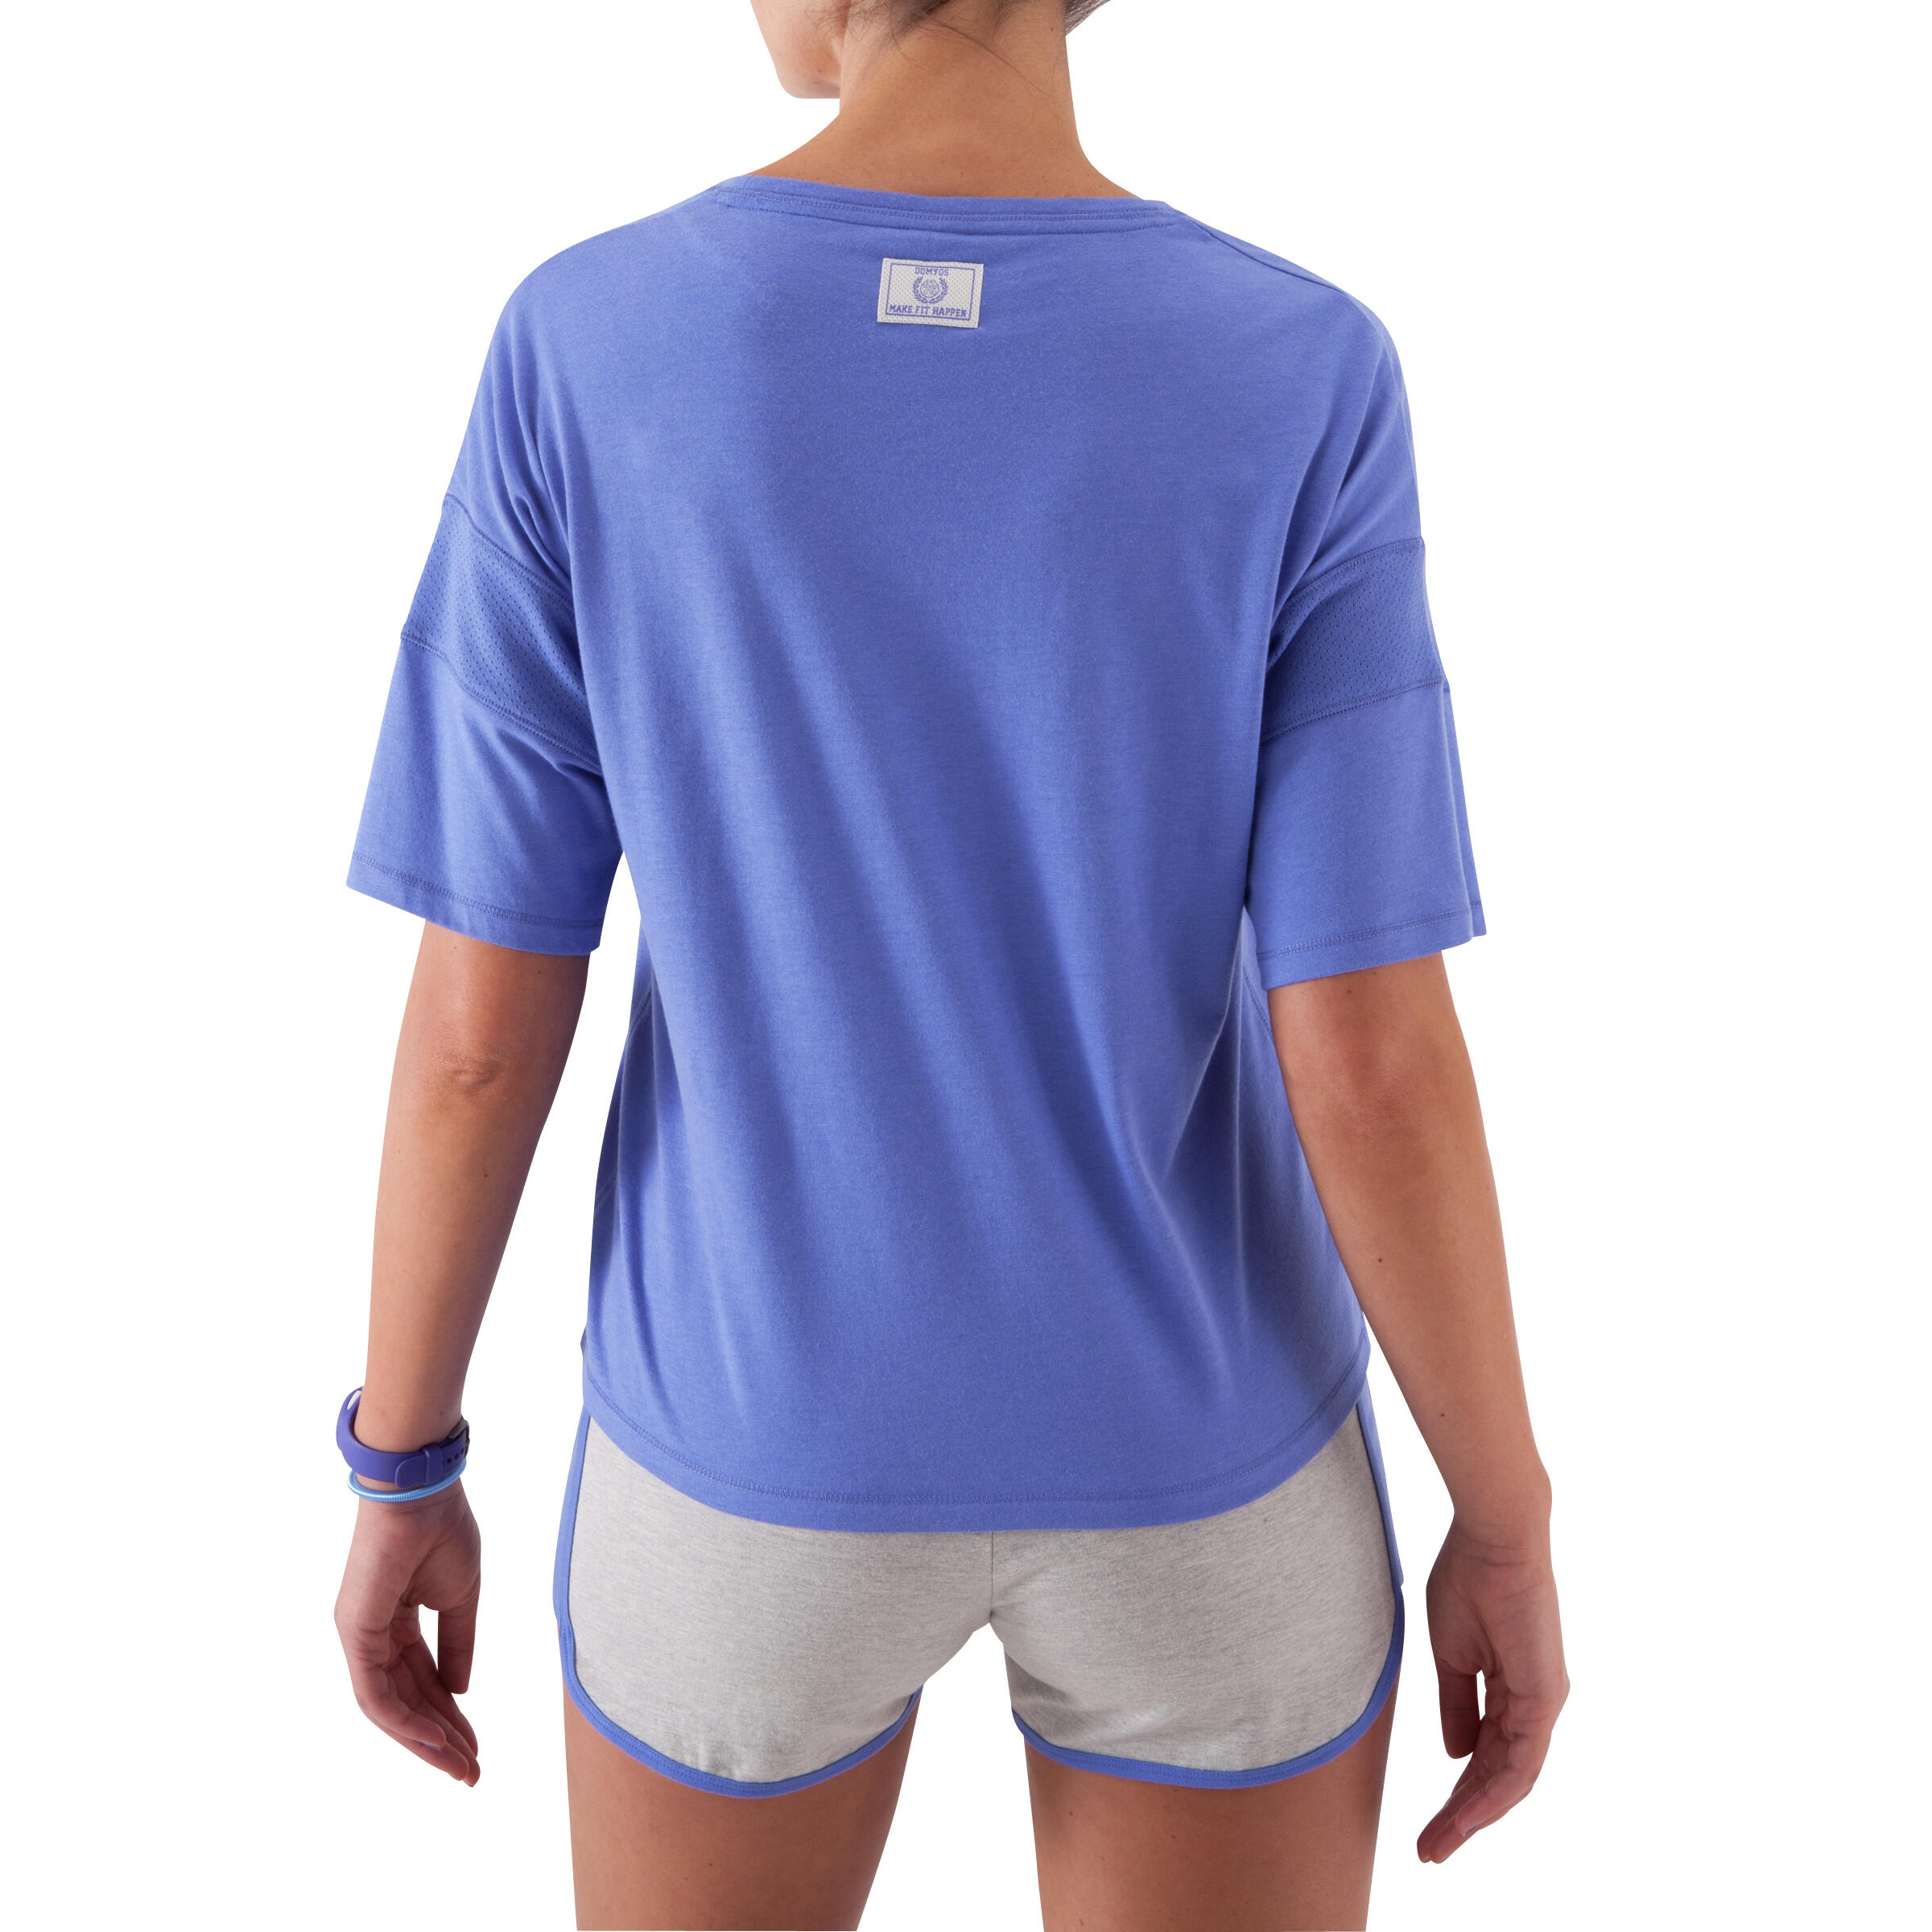 Women's Relaxed-fit Fitness Short-Sleeved T-shirt - Blue 6/13